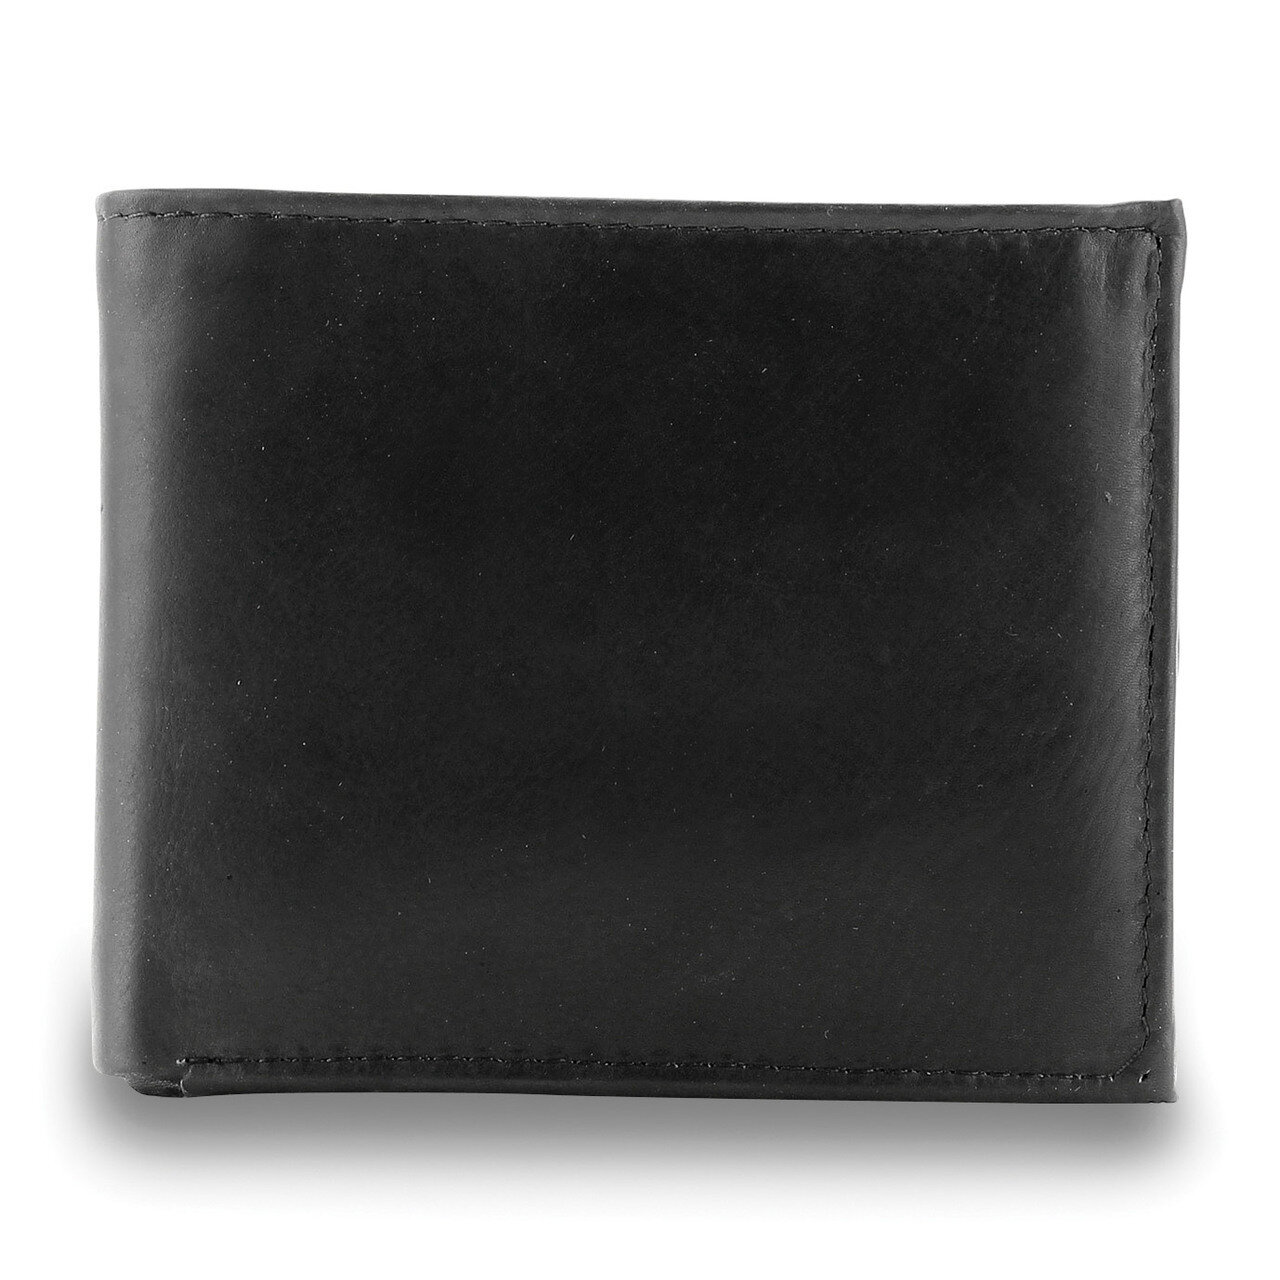 Black Leather Bi-fold Wallet with Fold-out Card Holders GM17788